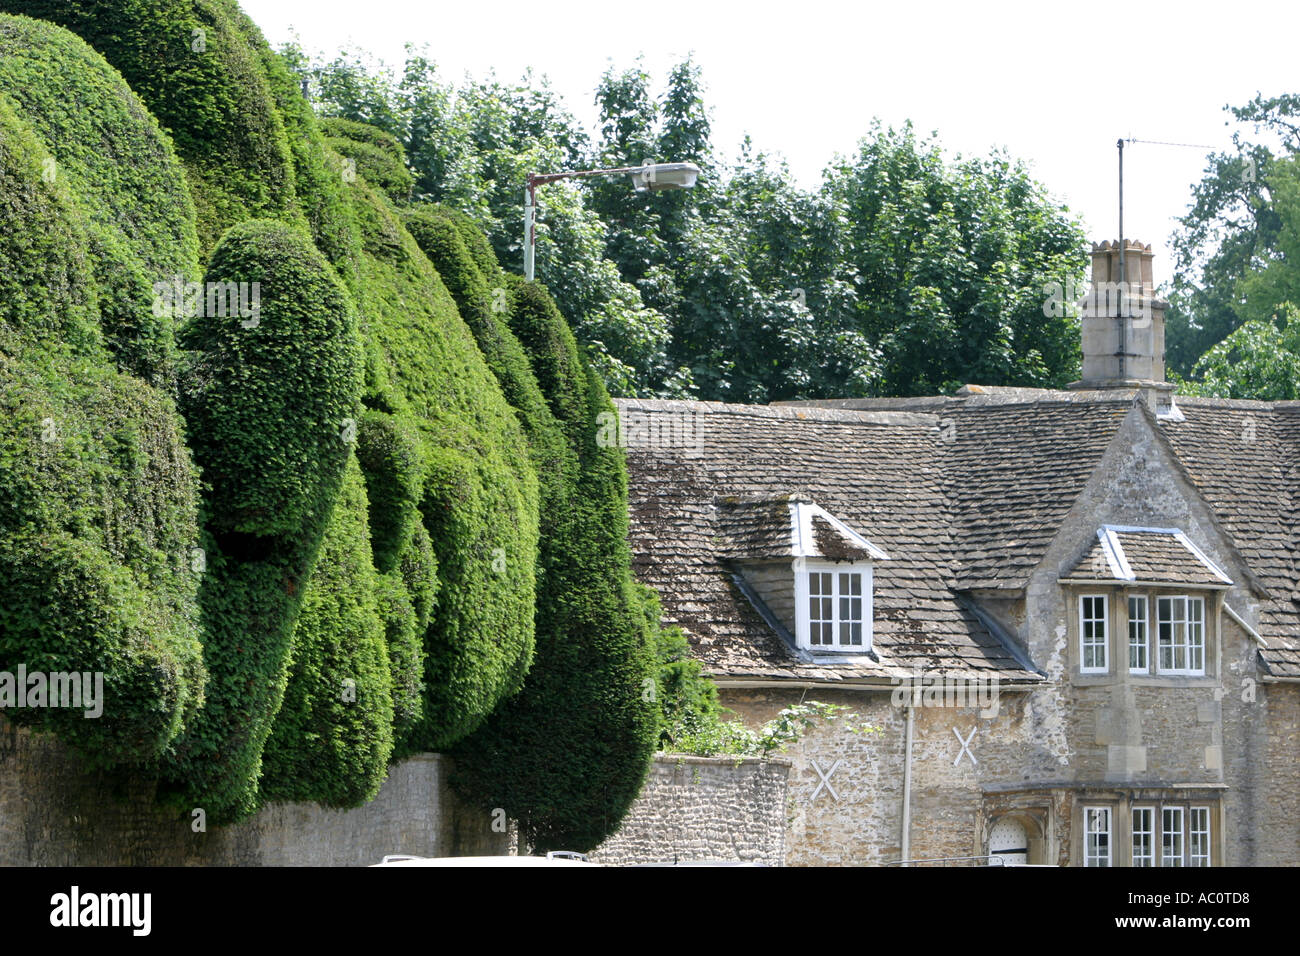 Very high hedges growing beyond rooftop level of neighbouring houses Stock Photo